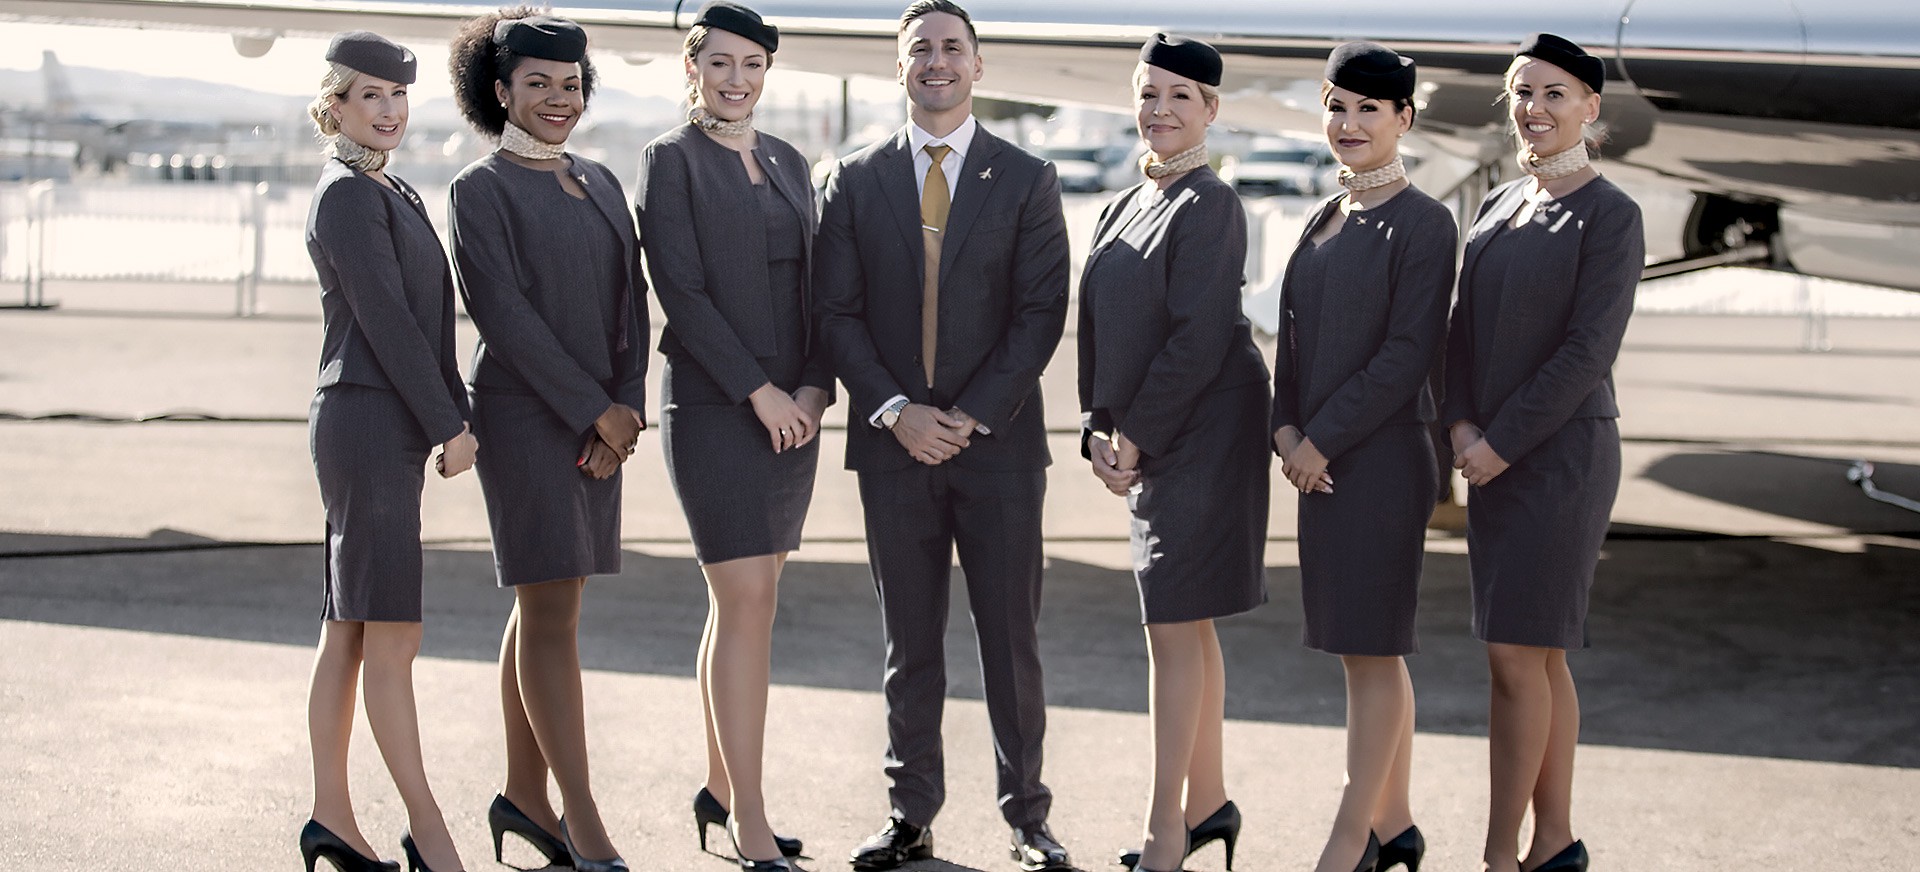 Group of flight attendants standing together in front of an aircraft